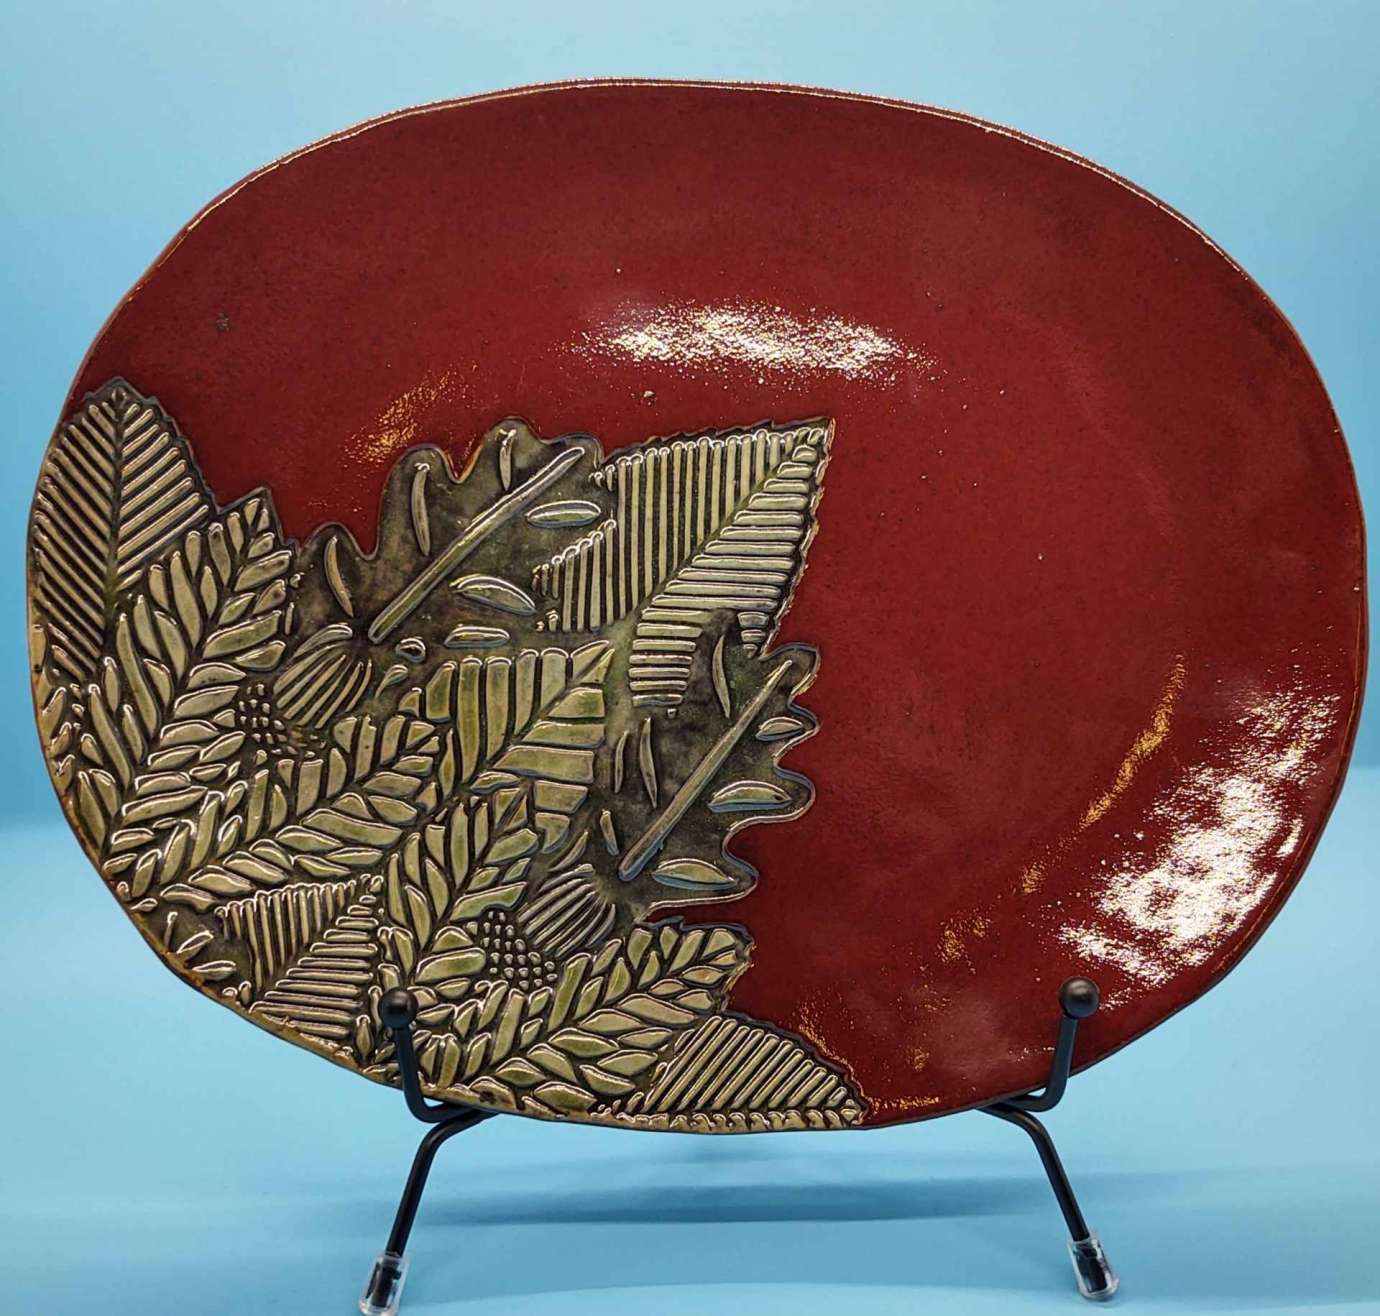 A photo of a red ceramic plate with green and beige leaves on it